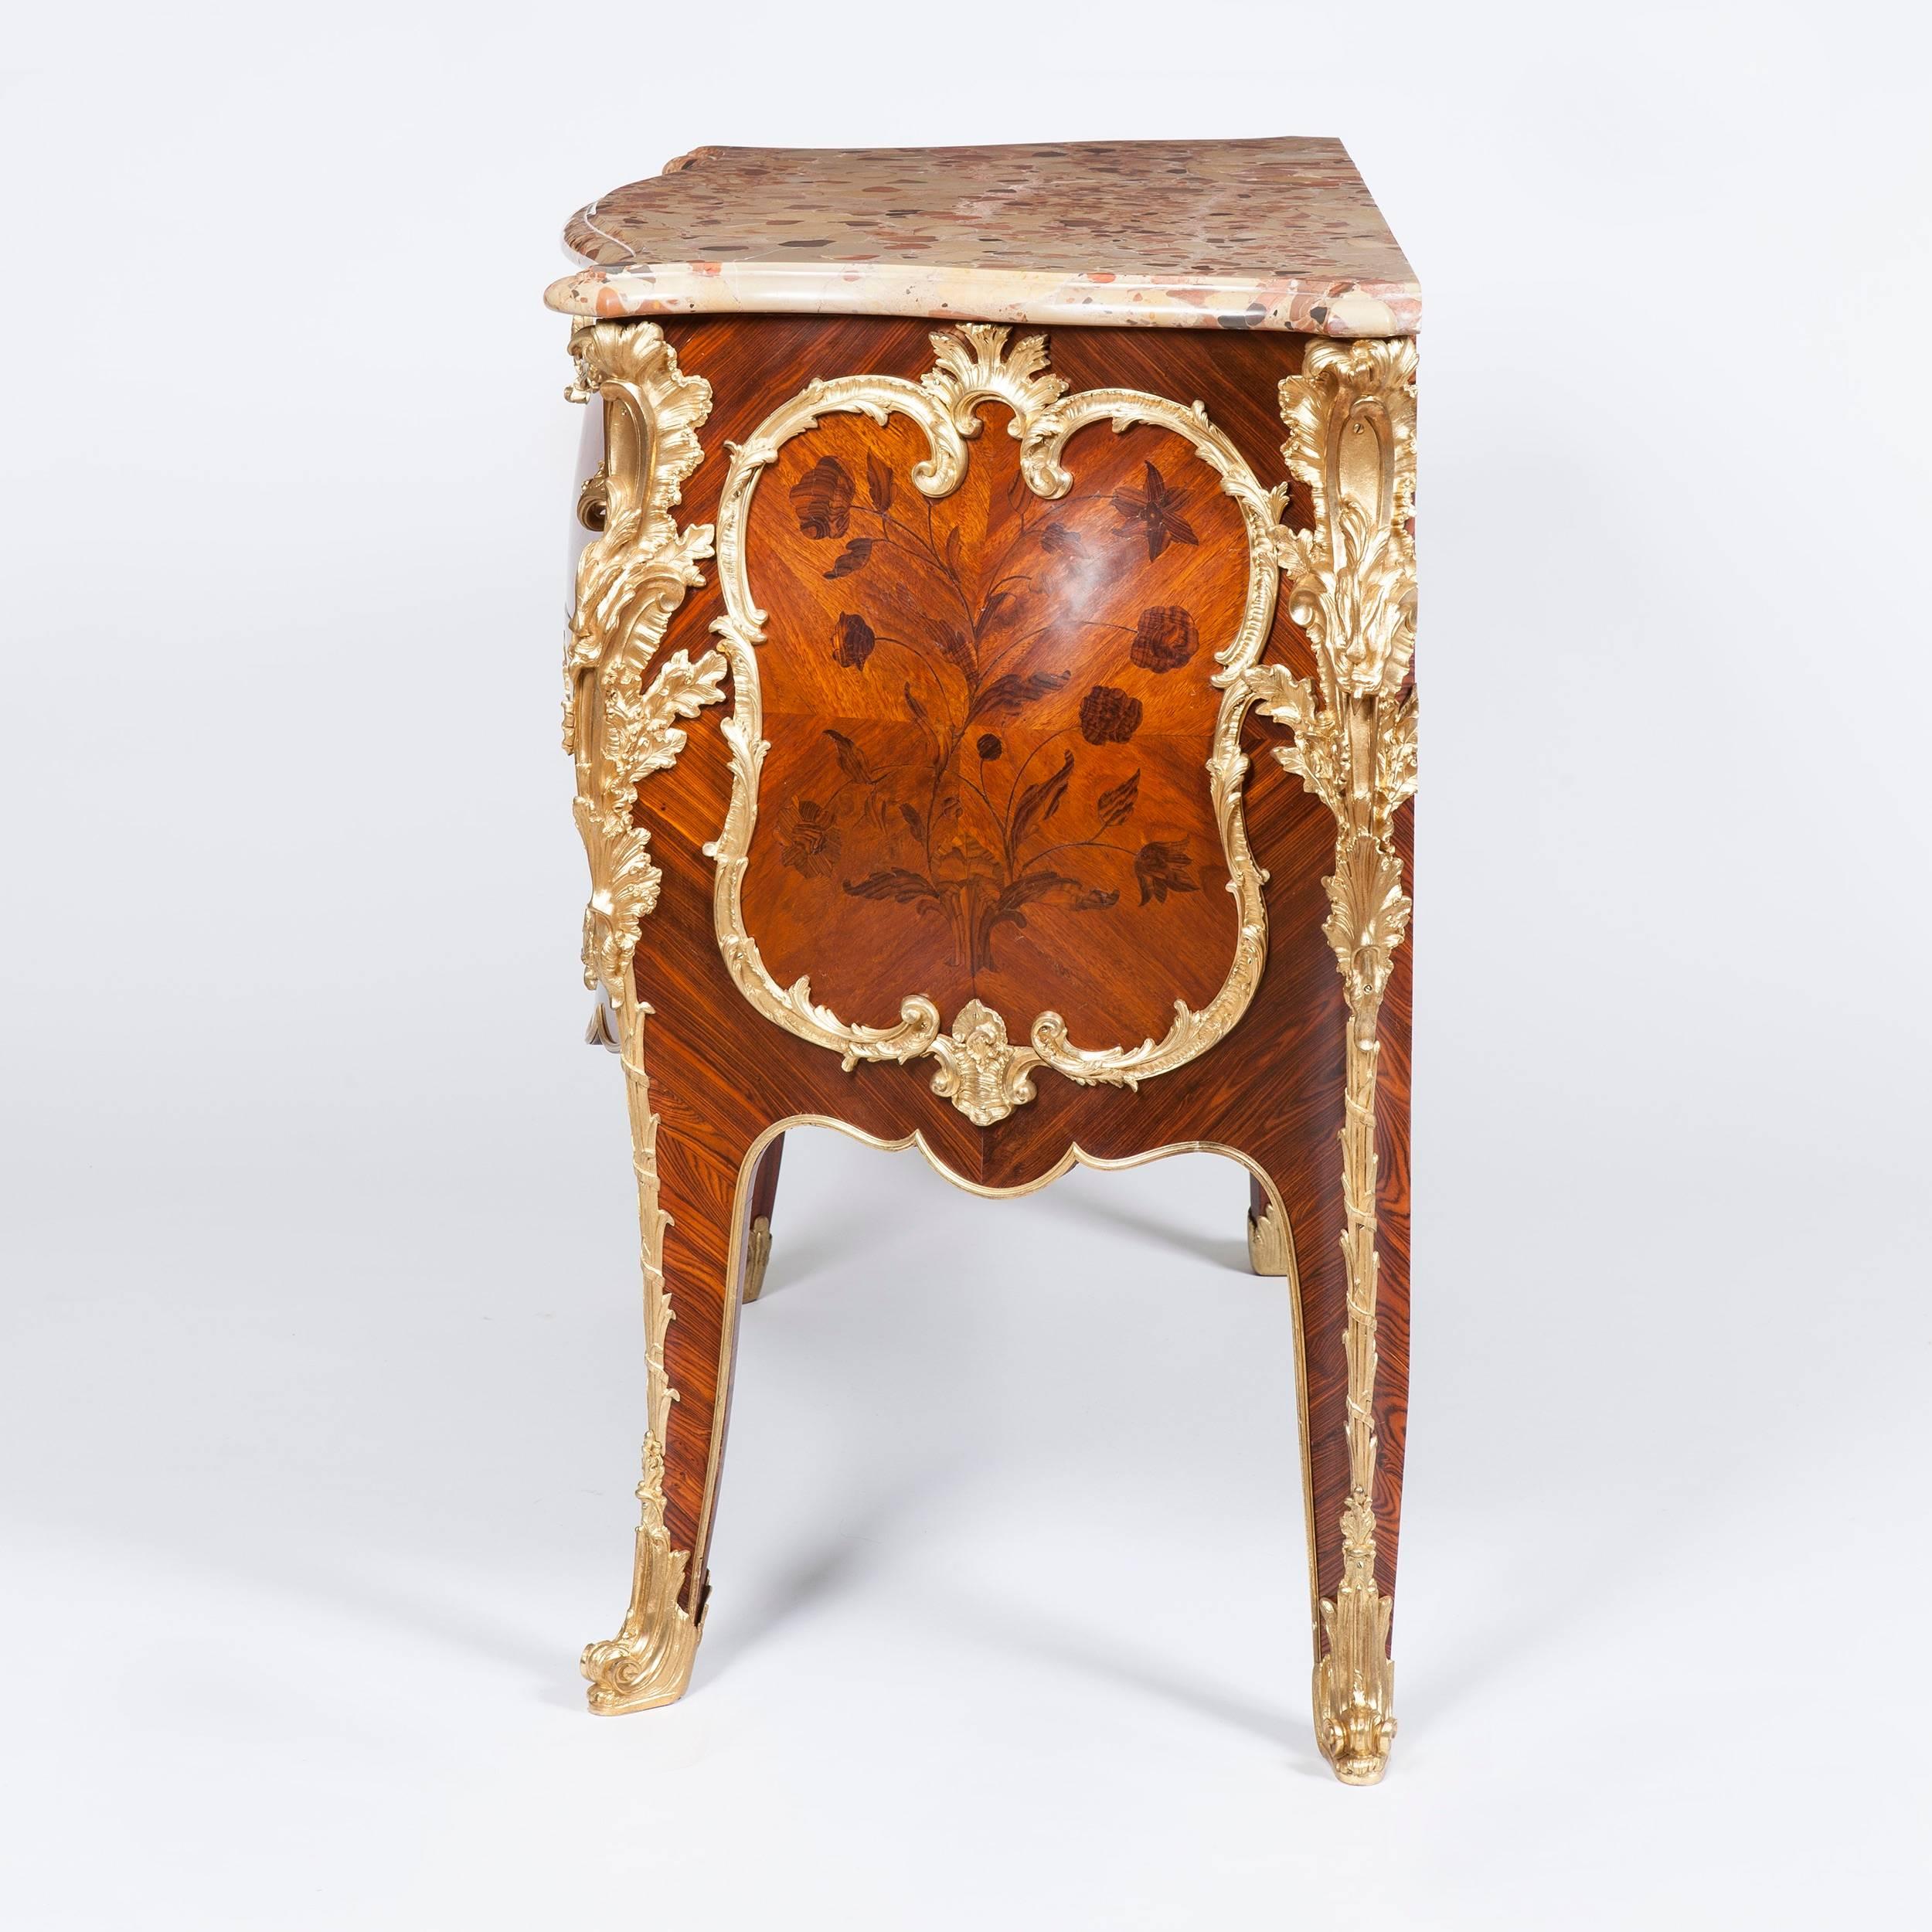 A fine commode in the Louis XV manner after a model by Jacques Dubois By Maison Rogié of Paris.

Constructed in book-matched kingwood veneers, inlaid with floral motifs, and richly decorated with fine ormolu mounts; of bombe serpentine form,